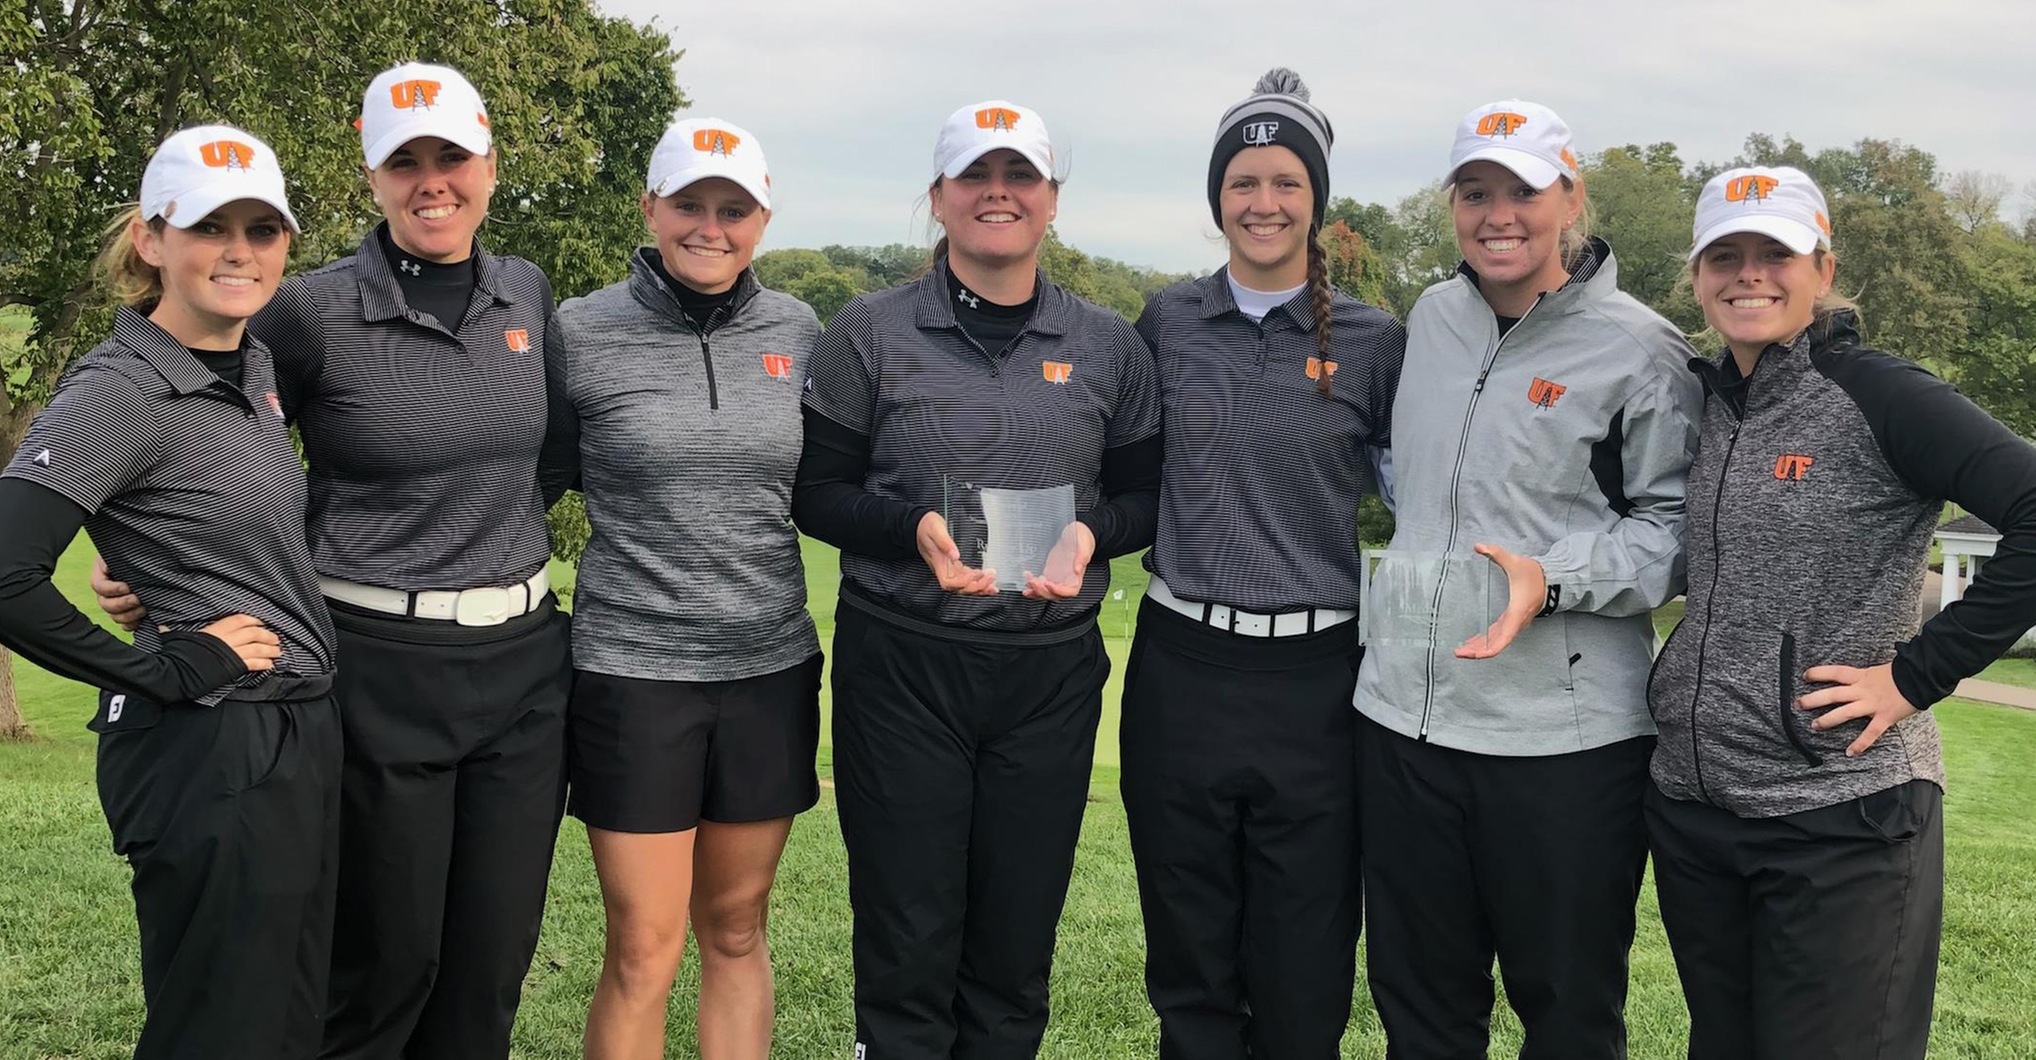 Torres Wins | Oilers Finish as Runner-Up at Dayton Fall Invite